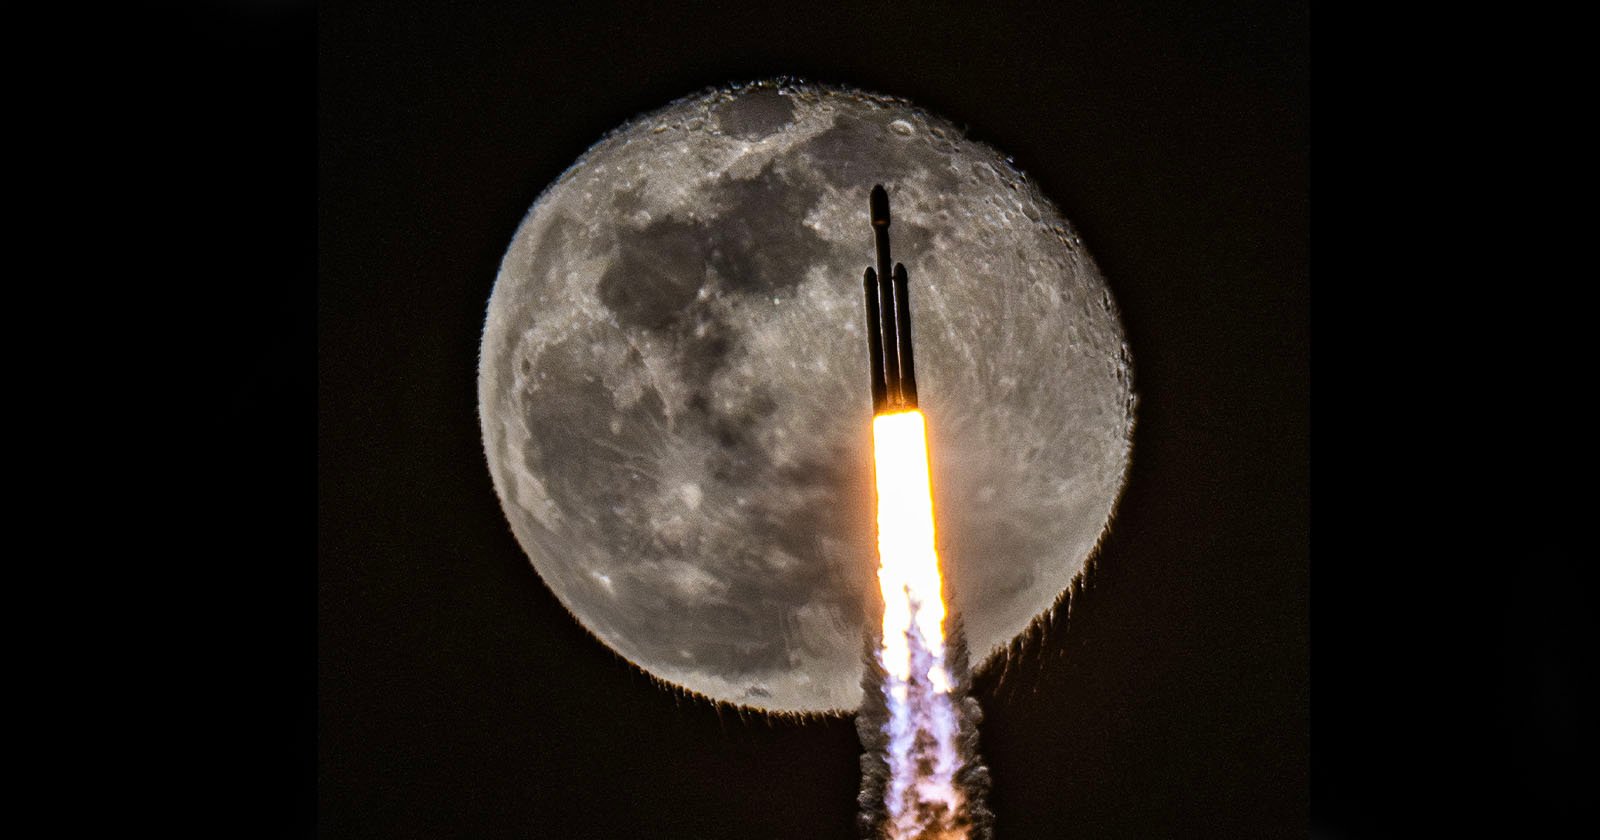  spacex rocket causes moon ripple photographer fantastic image 